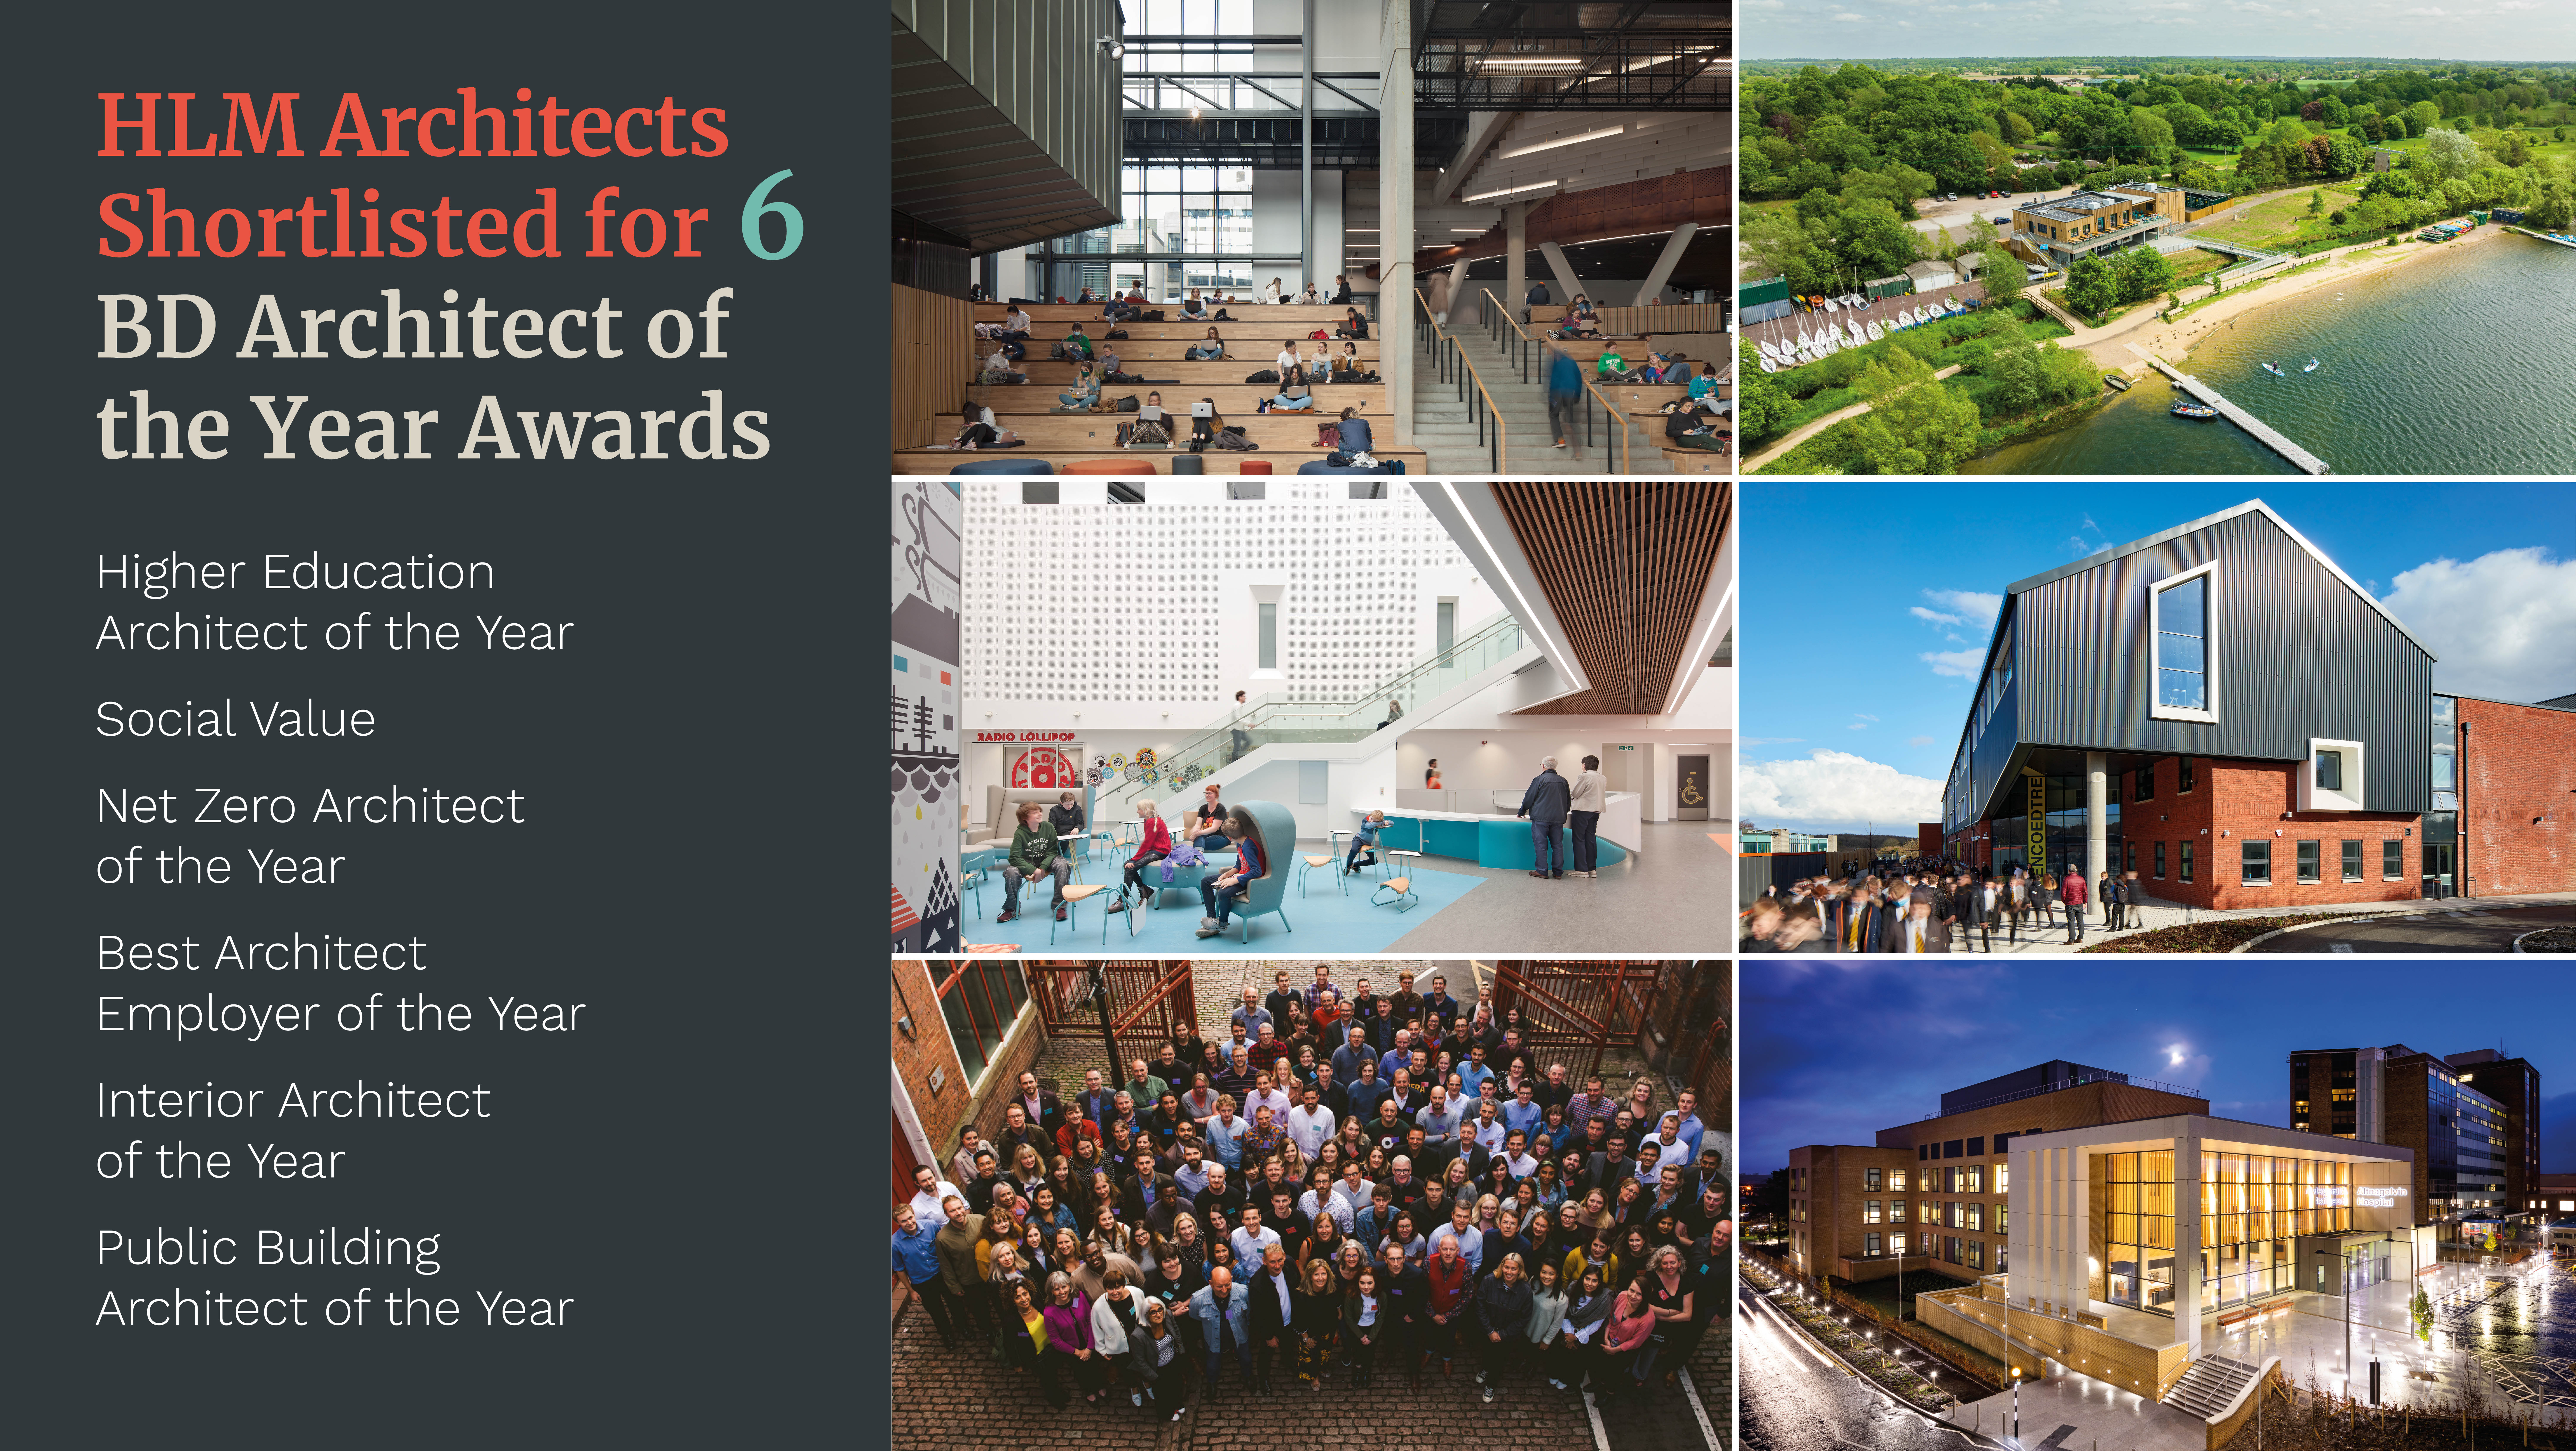 HLM Architects finalists in 6 categories at BD Architect of the Year Awards 2022